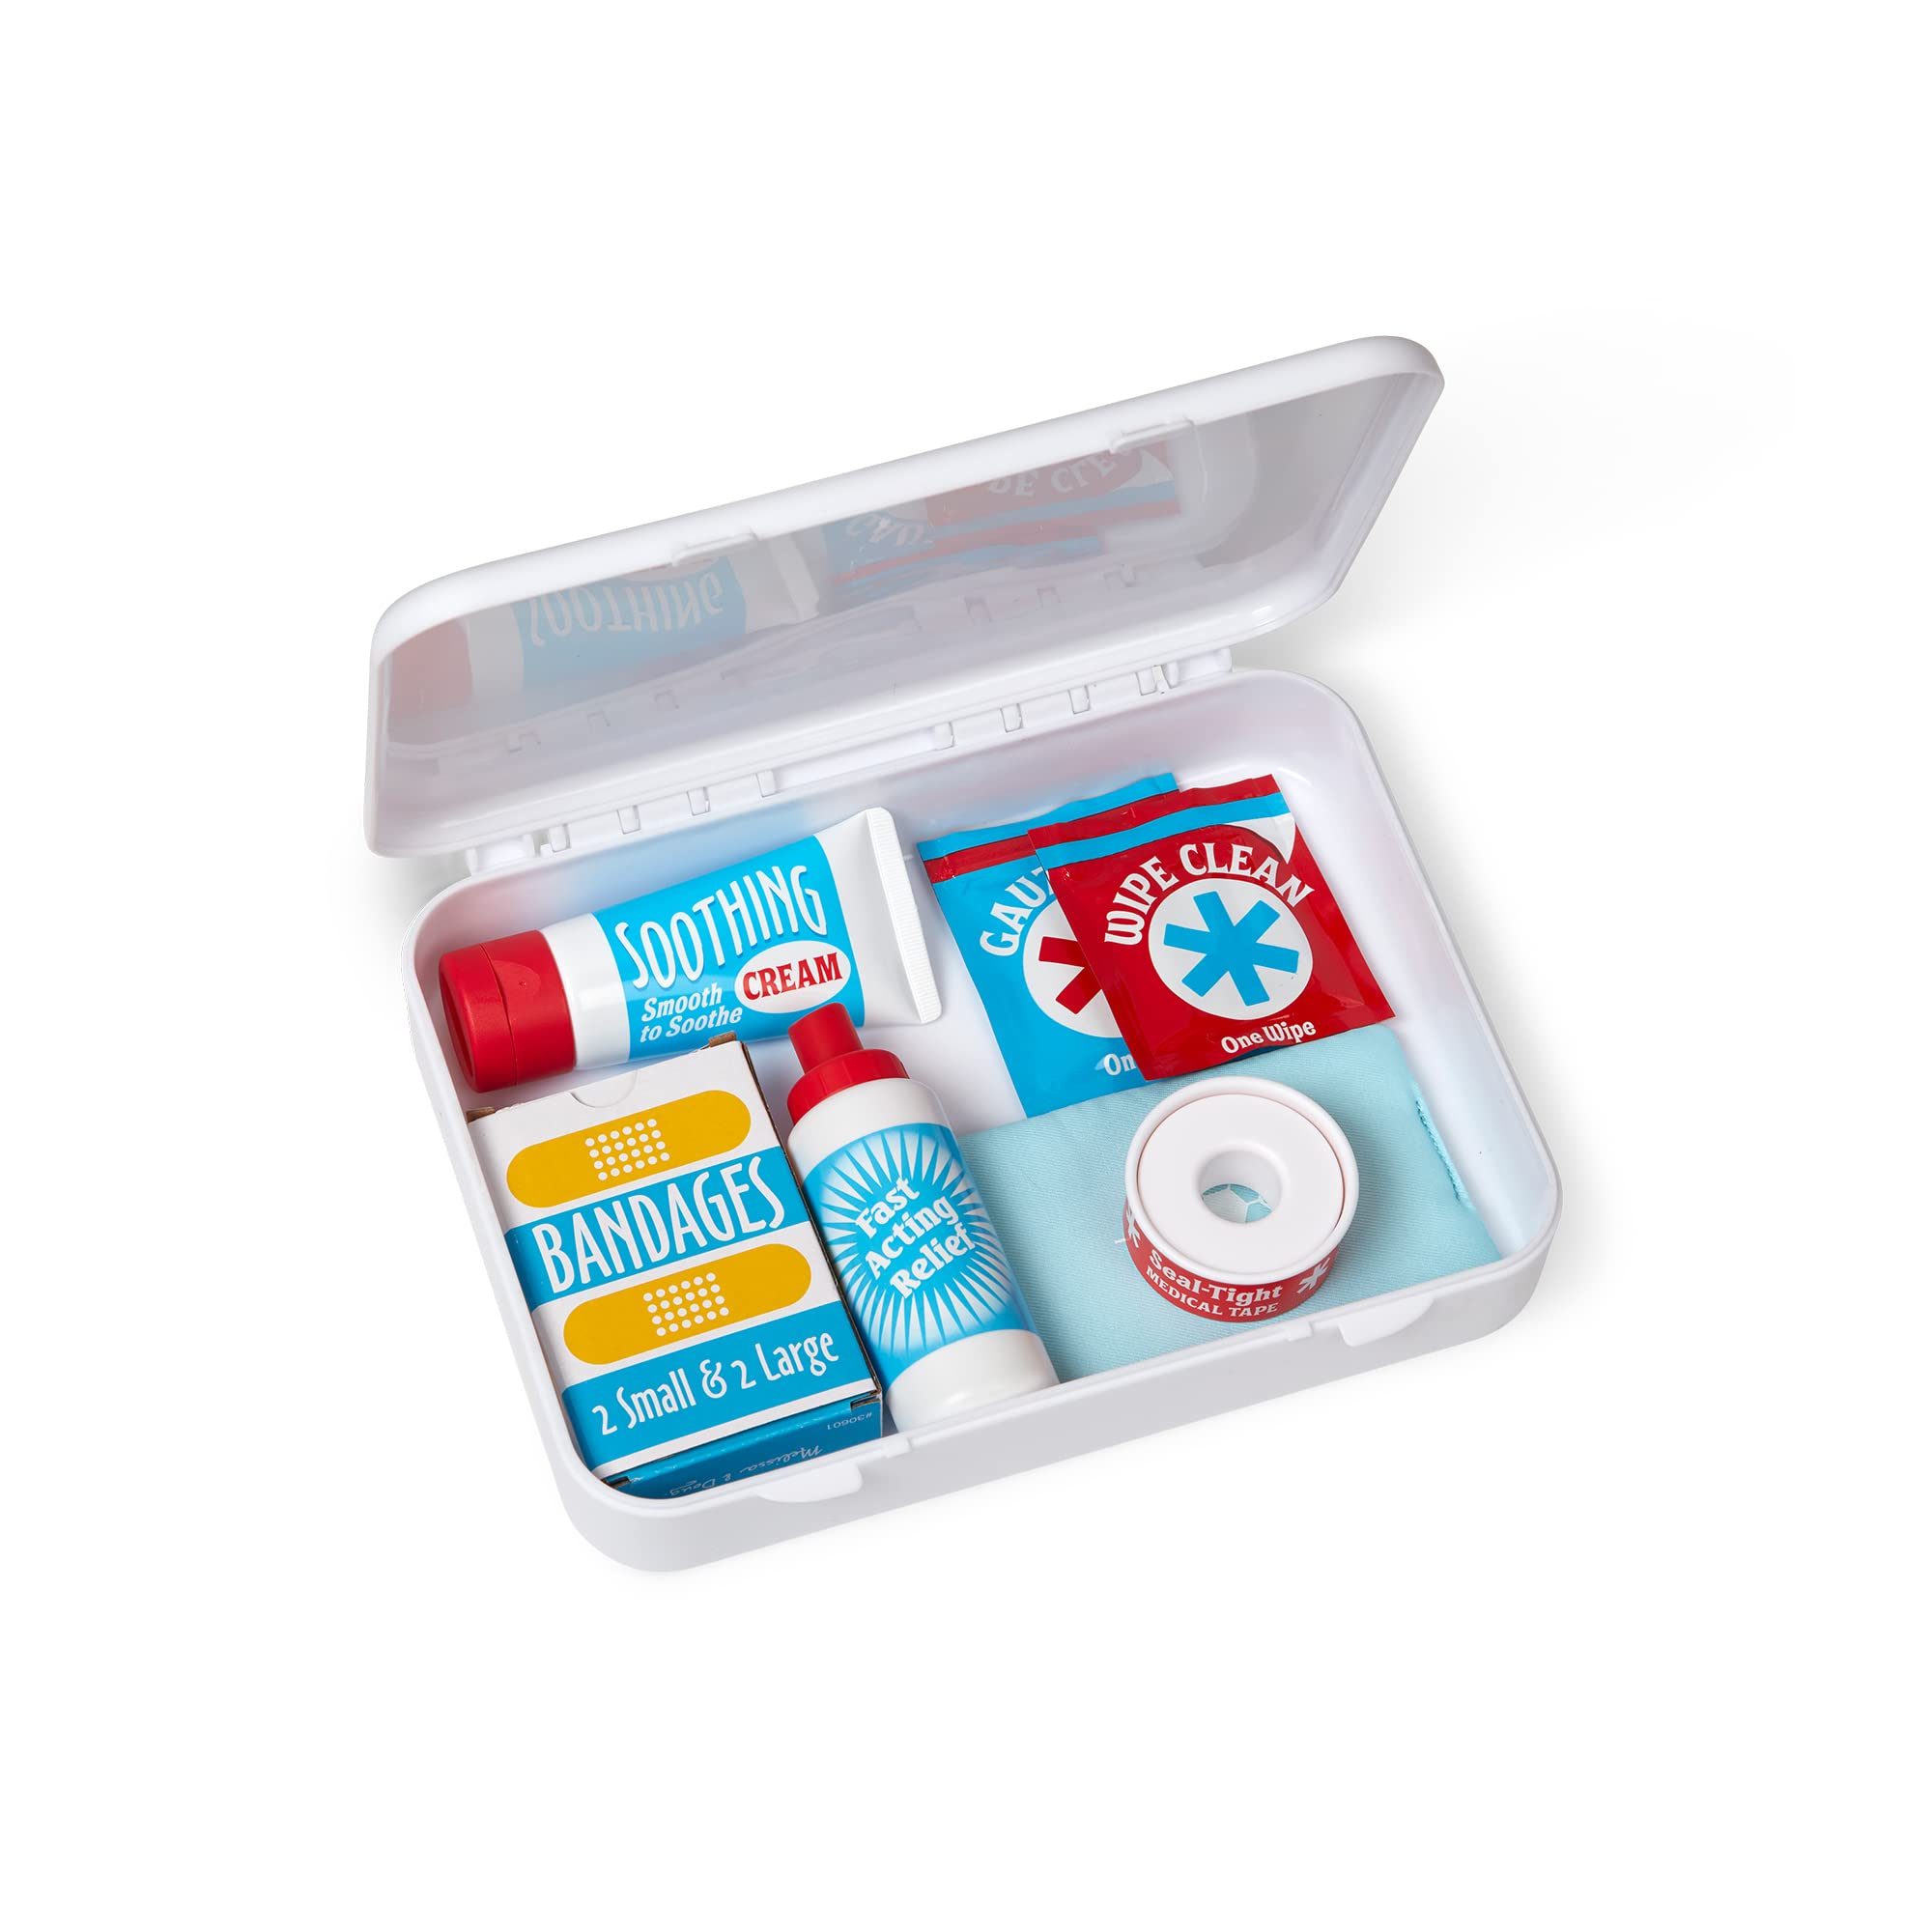 Melissa & Doug Get Well First Aid Kit Play Set – 25 Toy Pieces - Pretend Play Reusable Bandages